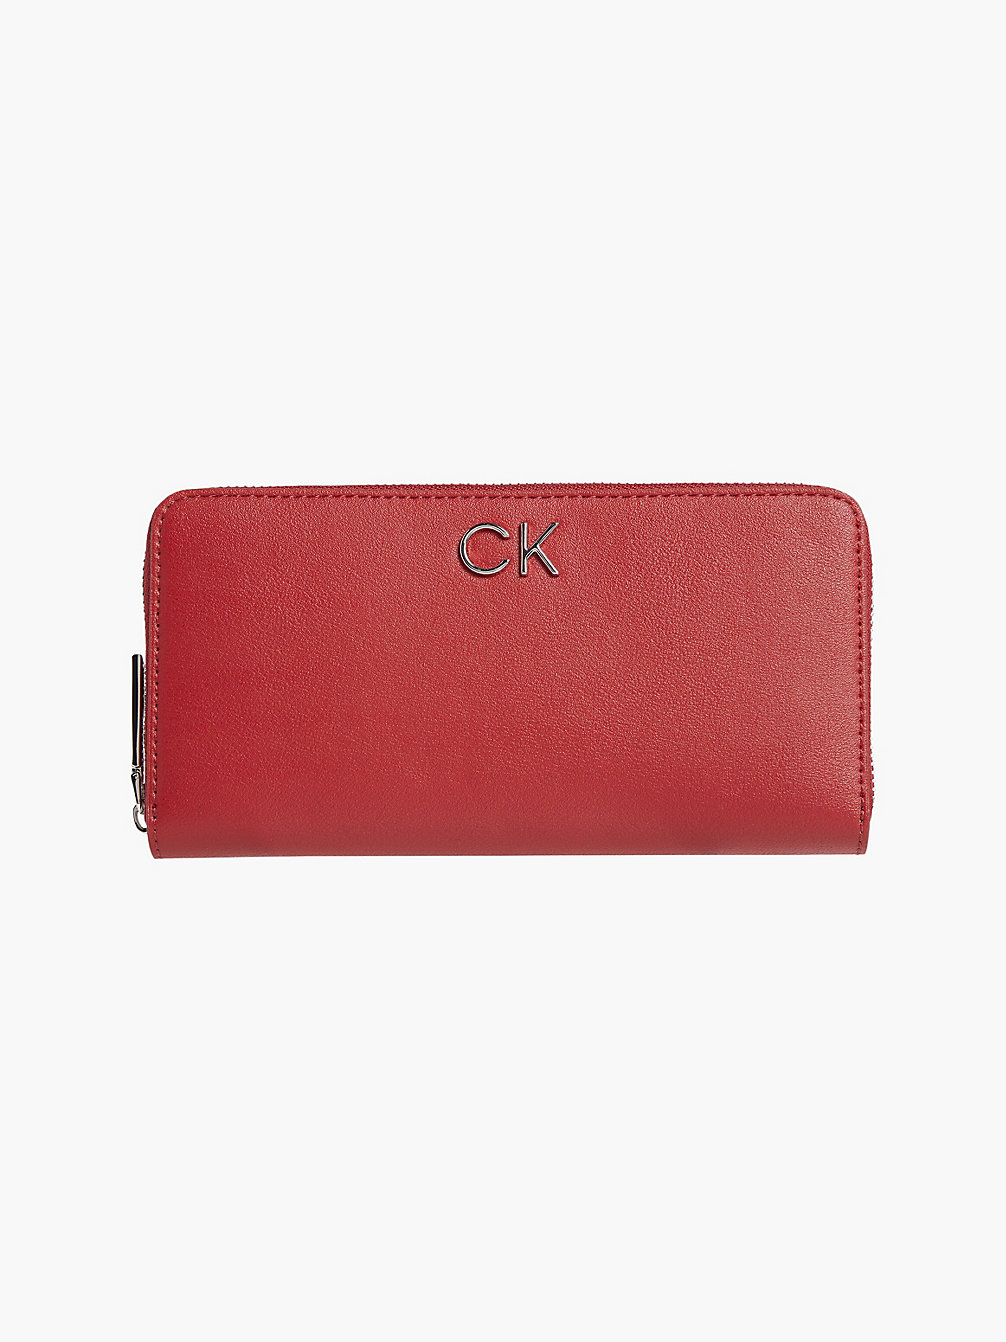 RACING RED Large Recycled Zip Around Wallet undefined women Calvin Klein